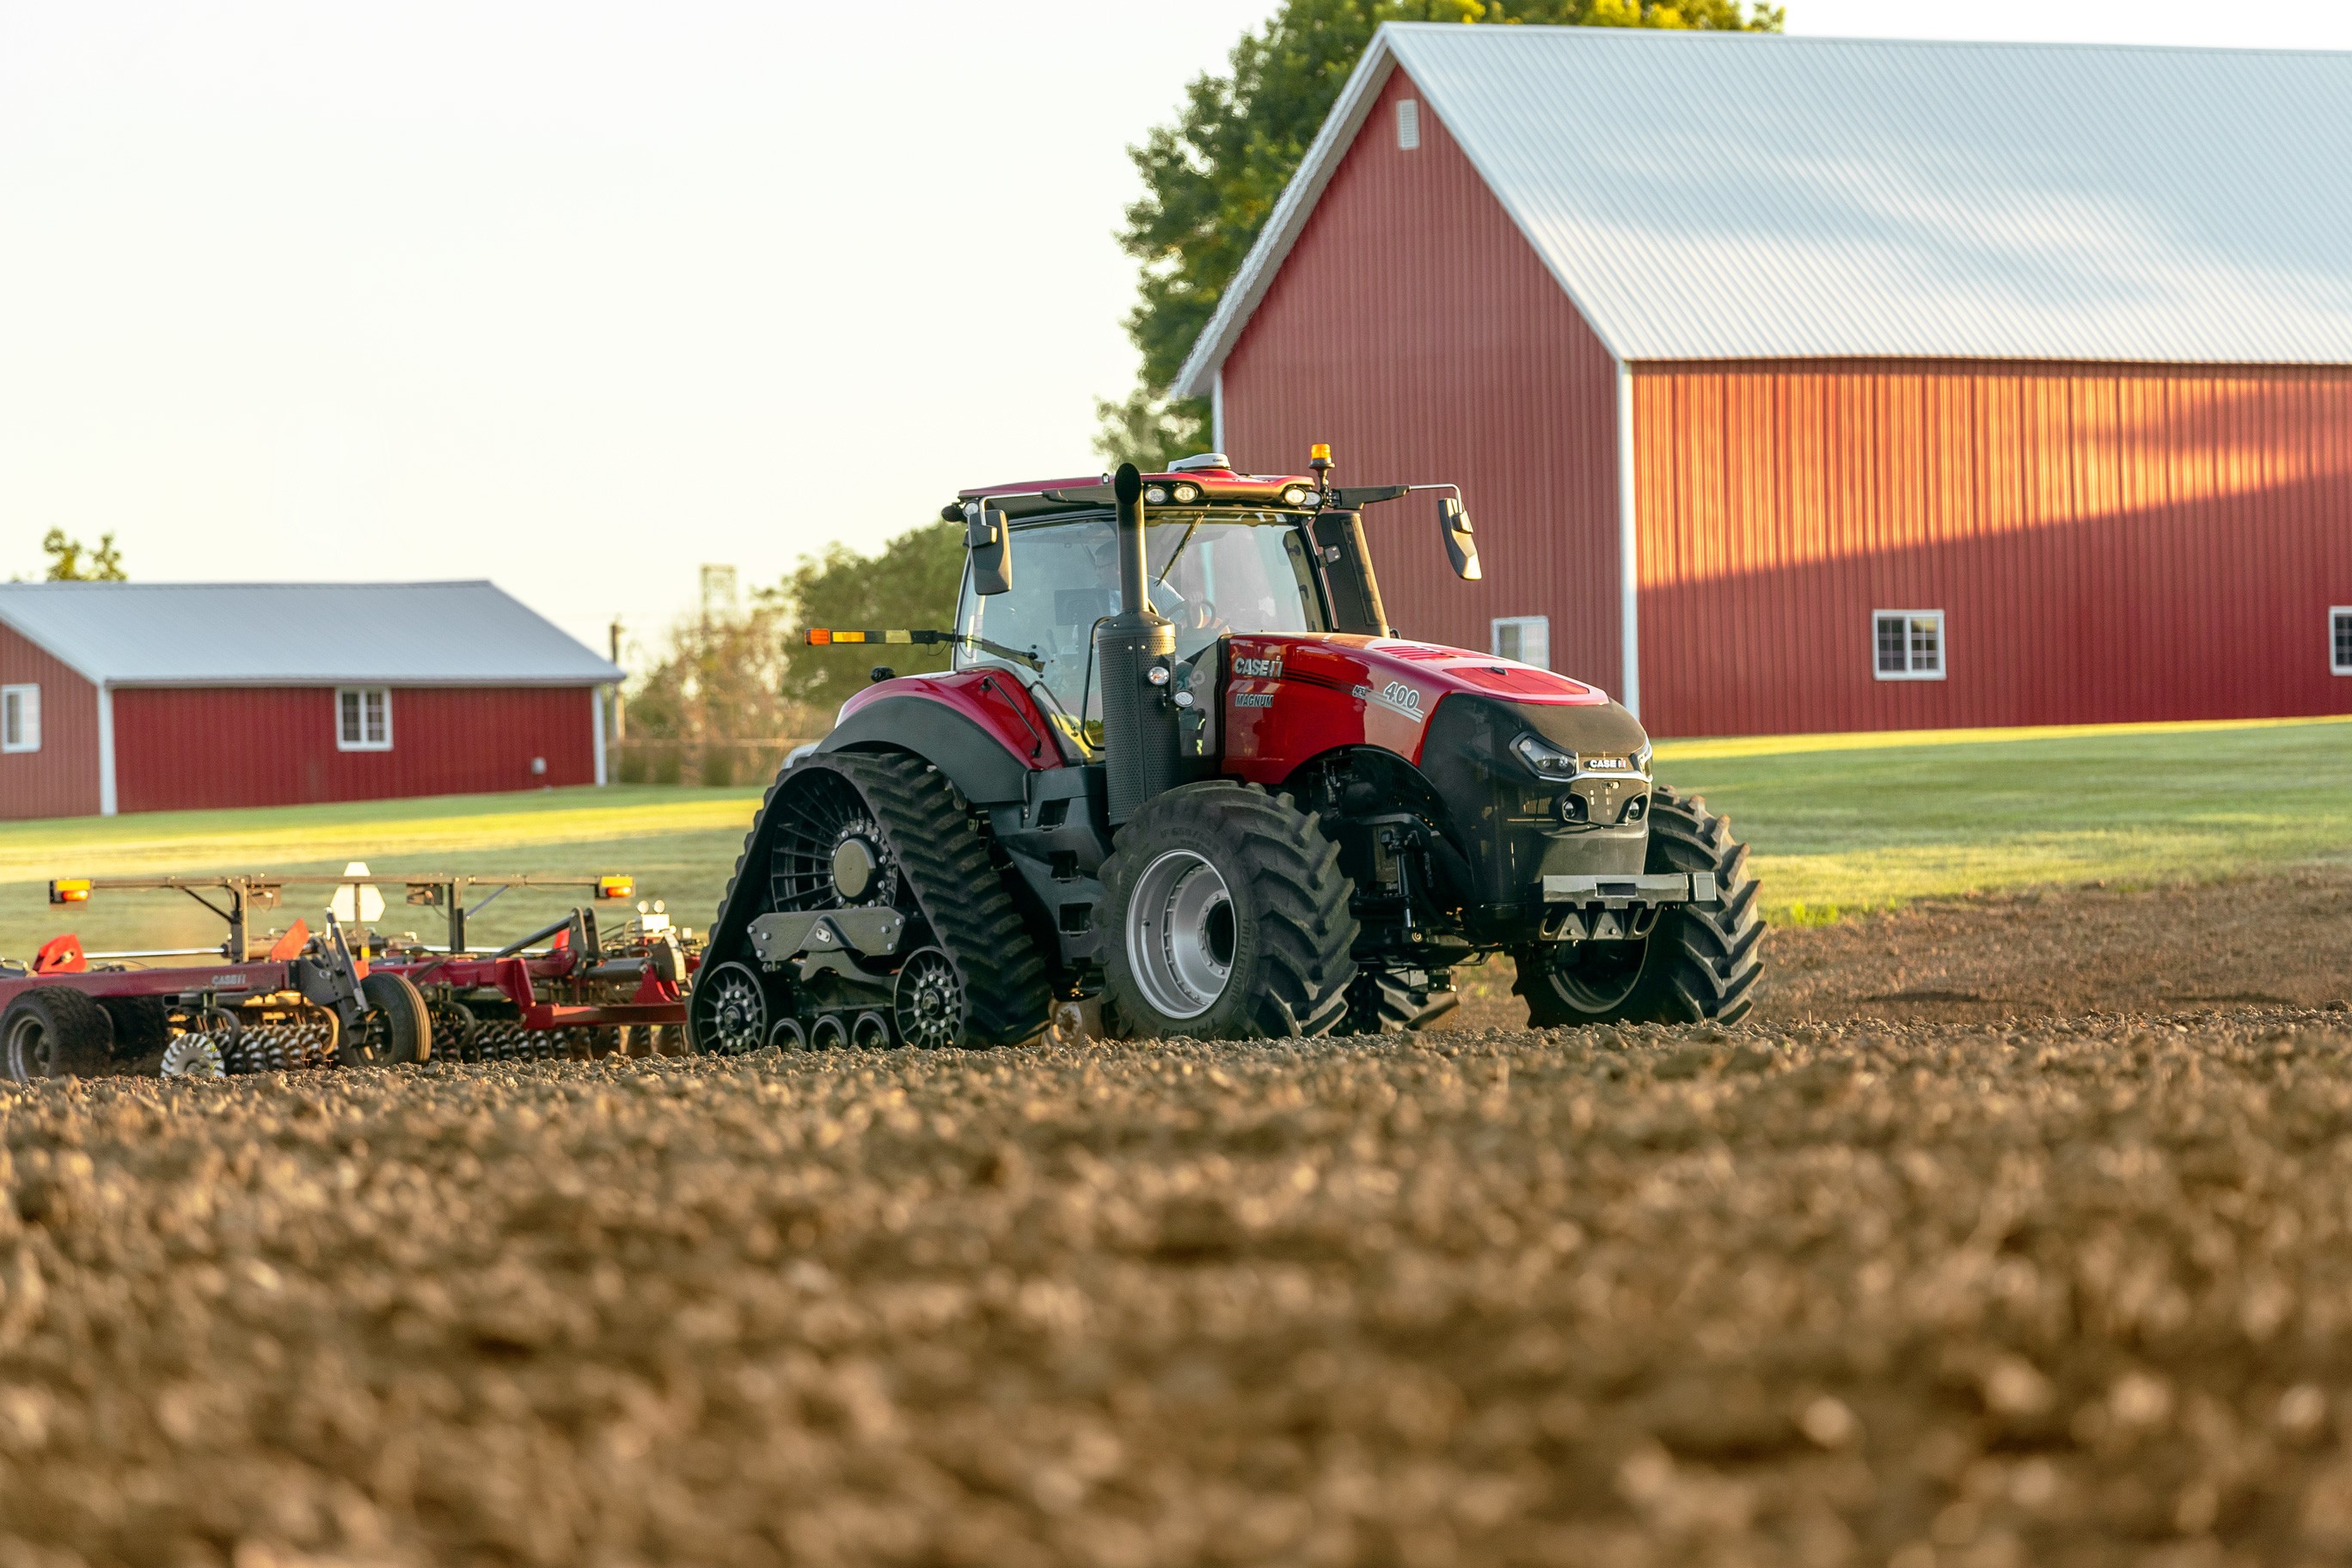 Case IH Earns Three 2020 AE50 Awards for Innovation